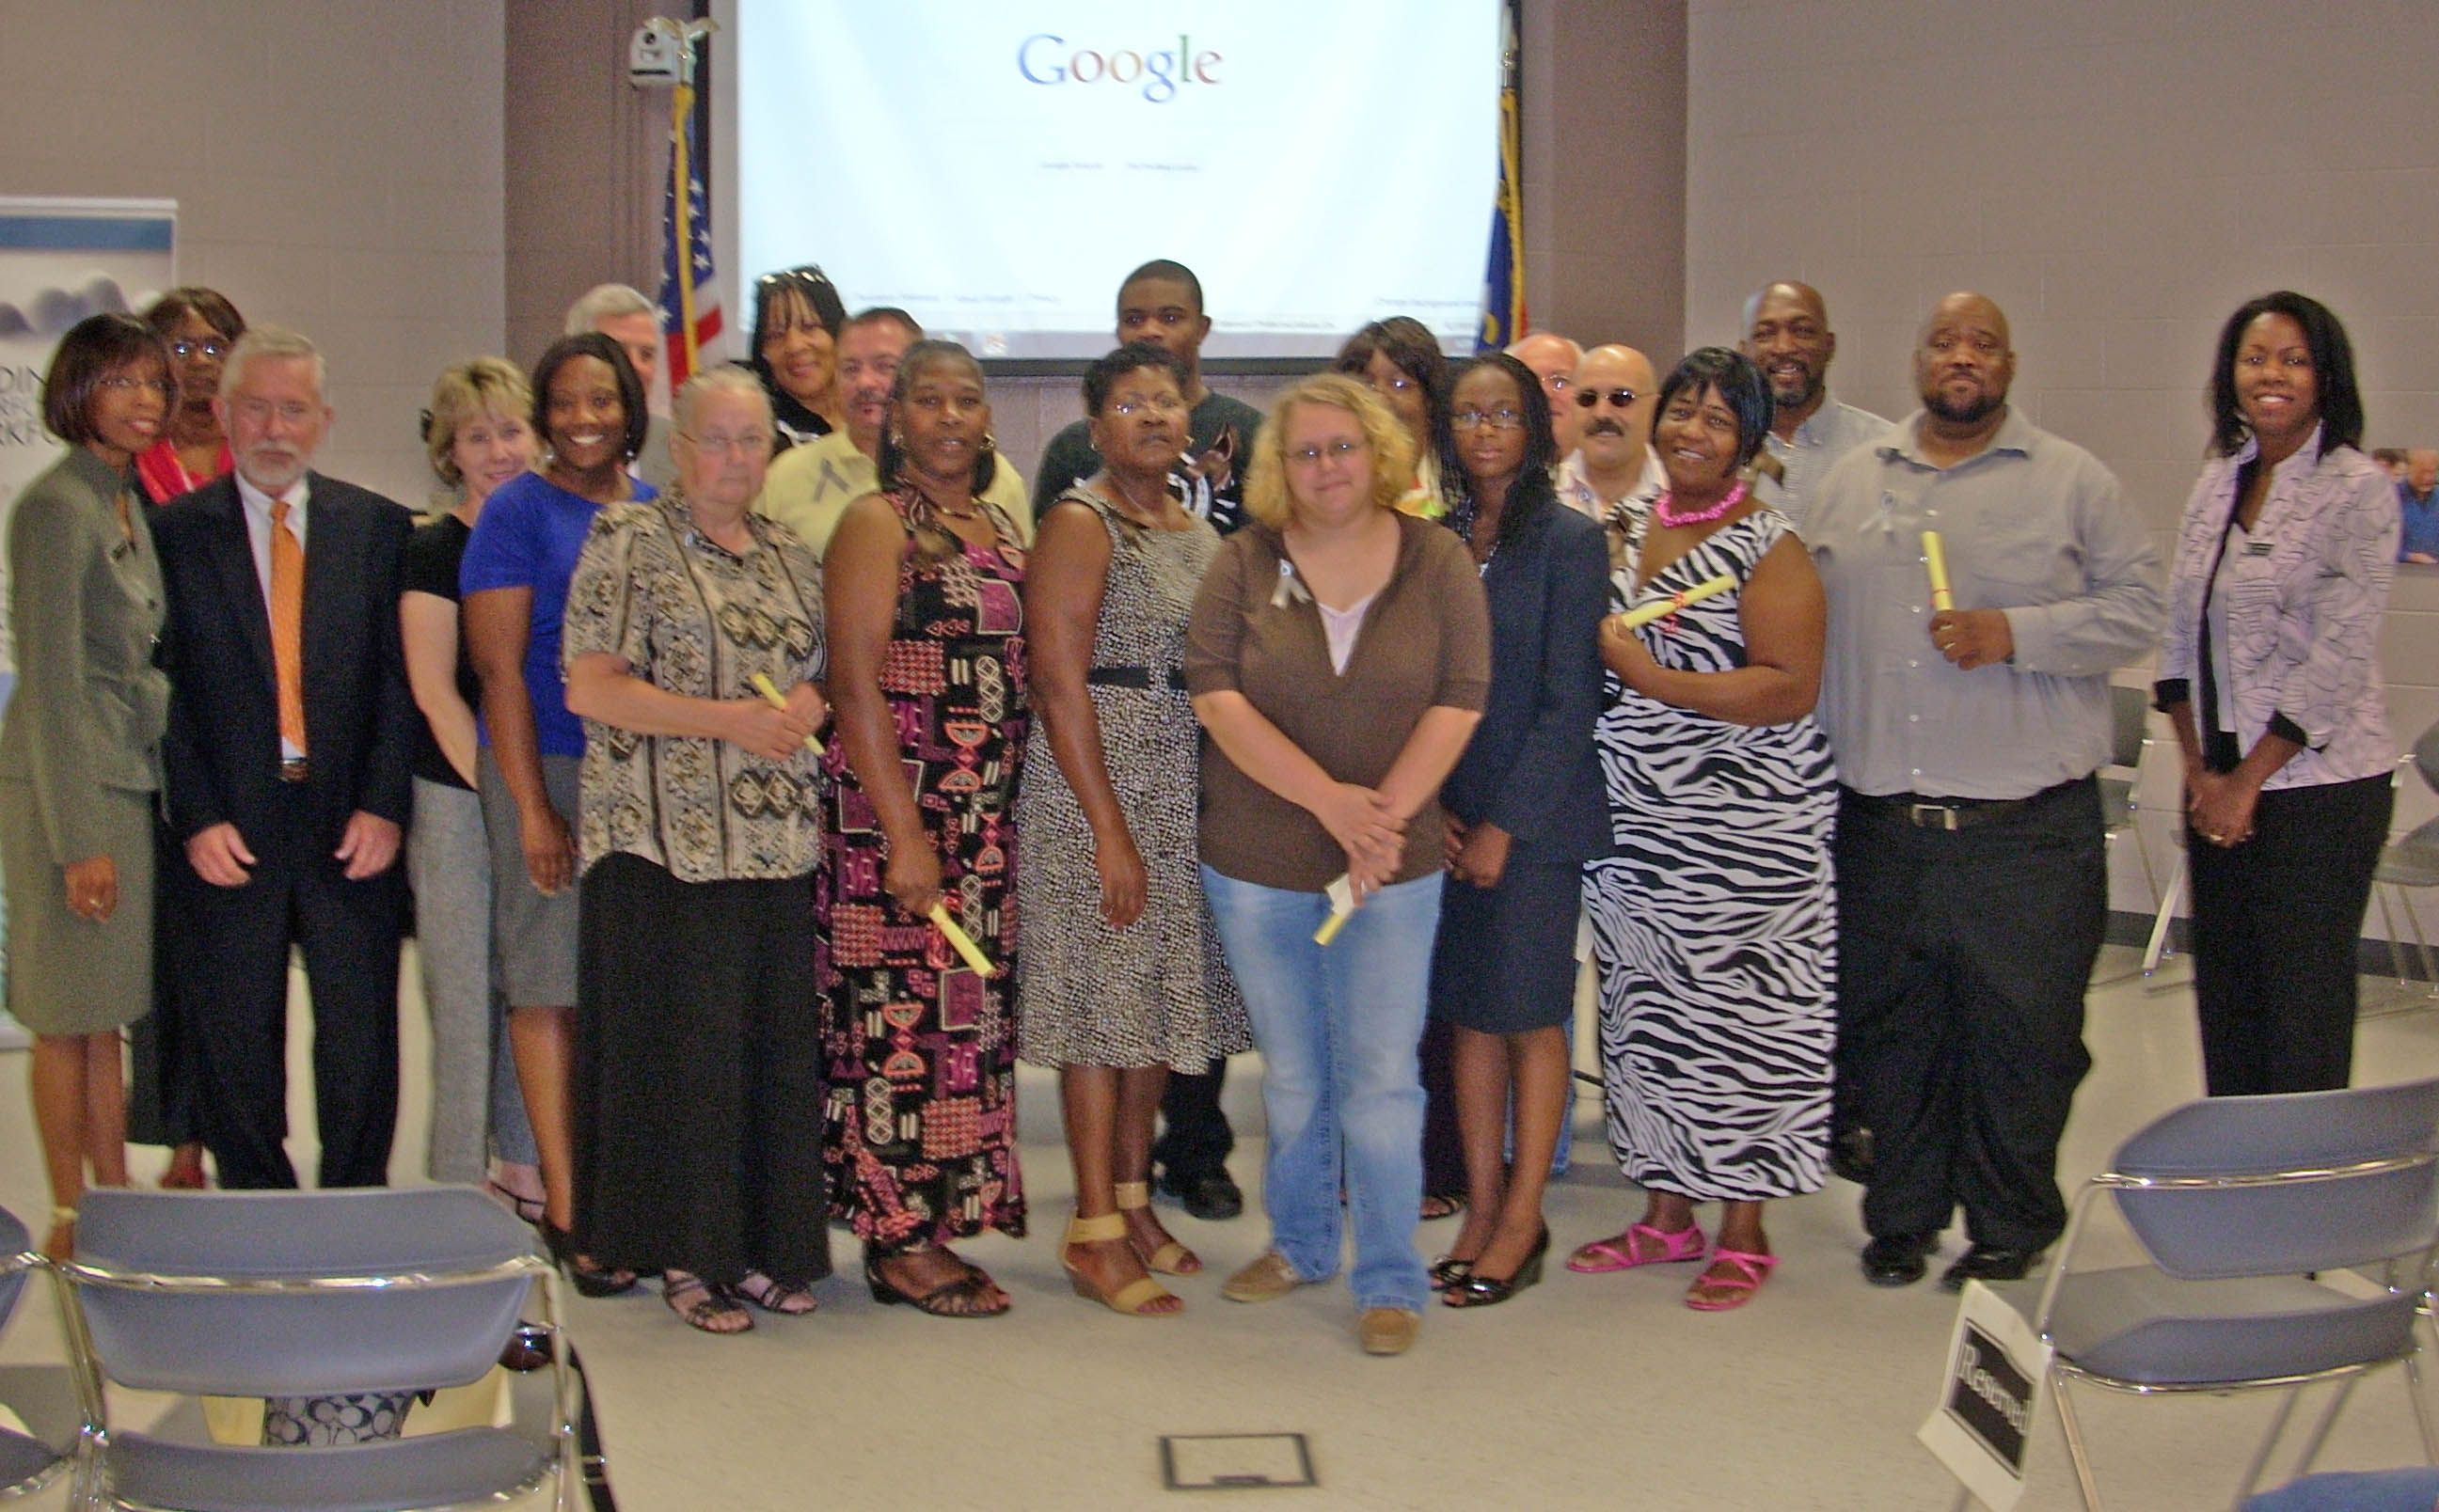 Click to enlarge,  Central Carolina Community College honored 30 recipients of N.C. Career Readiness Certificates at a recognition ceremony Aug. 11 at its Harnett County Campus. The recipients had successfully passed Career Readiness Certificate assessments at the Bronze, Silver or Gold level, indicating their basic workforce skill levels in applied math, reading for information, and locating information. Those receiving their certificates (not shown in order) were: Gold - Victor Bass, of Lillington, and Luther Tannerhill, of Linden; Silver - Demetrius Dahilia, Jamerson Campbell and Connie Greene, all of Dunn; Ricky Blackmon, of Lillington; Dora Martinez, of Angier; Louis Scrantino, of Fuquay Varina; and Mary Mitchell, of Spring Lake; and Bronze - Angela Gunn, Ebony Ray, Judy Walker, Prentiss McLean, and Mayanna Geddie, all of Bunnlevel; Jamaica Wilkerson, and Allene Ferguson, both of Dunn; Jeanette Grady and Paulette Chance, both of Lillington; Jeremy Aycock, of Godwin; Sylvia McLean, of Erwin; and Jamie Brannon, of Angier. Also at the ceremony were Dr. Stelfanie Williams, CCCC vice president of CCCC's Economic and Community Development Division; Bill Tyson, CCCC Harnett provost; Phyllis Huff, dean of Adult and Continuing Education; Len Royals, CCCC director of Continuing Education in Harnett County; CRC coordinator Patricia Stone-Hackett; HRD instructor/coordinator Nicole Brown; Jim Futrell, CRC Advisory Board chairman; and CCCC trustee Clem Medley.   